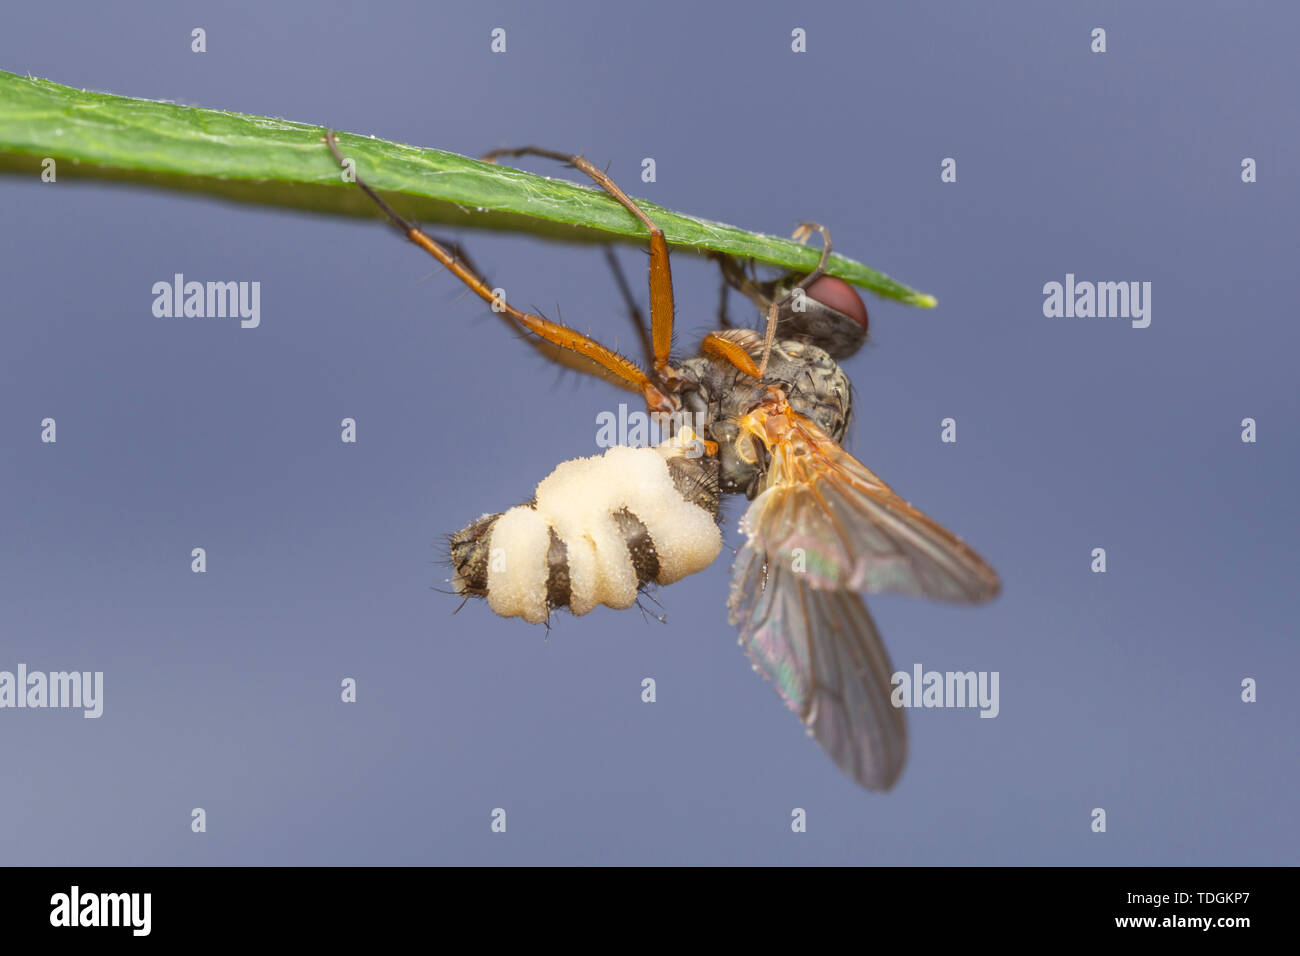 A fly killed by the pathogenic fungus Entomophthora muscae aka Fly Death Fungus. Stock Photo